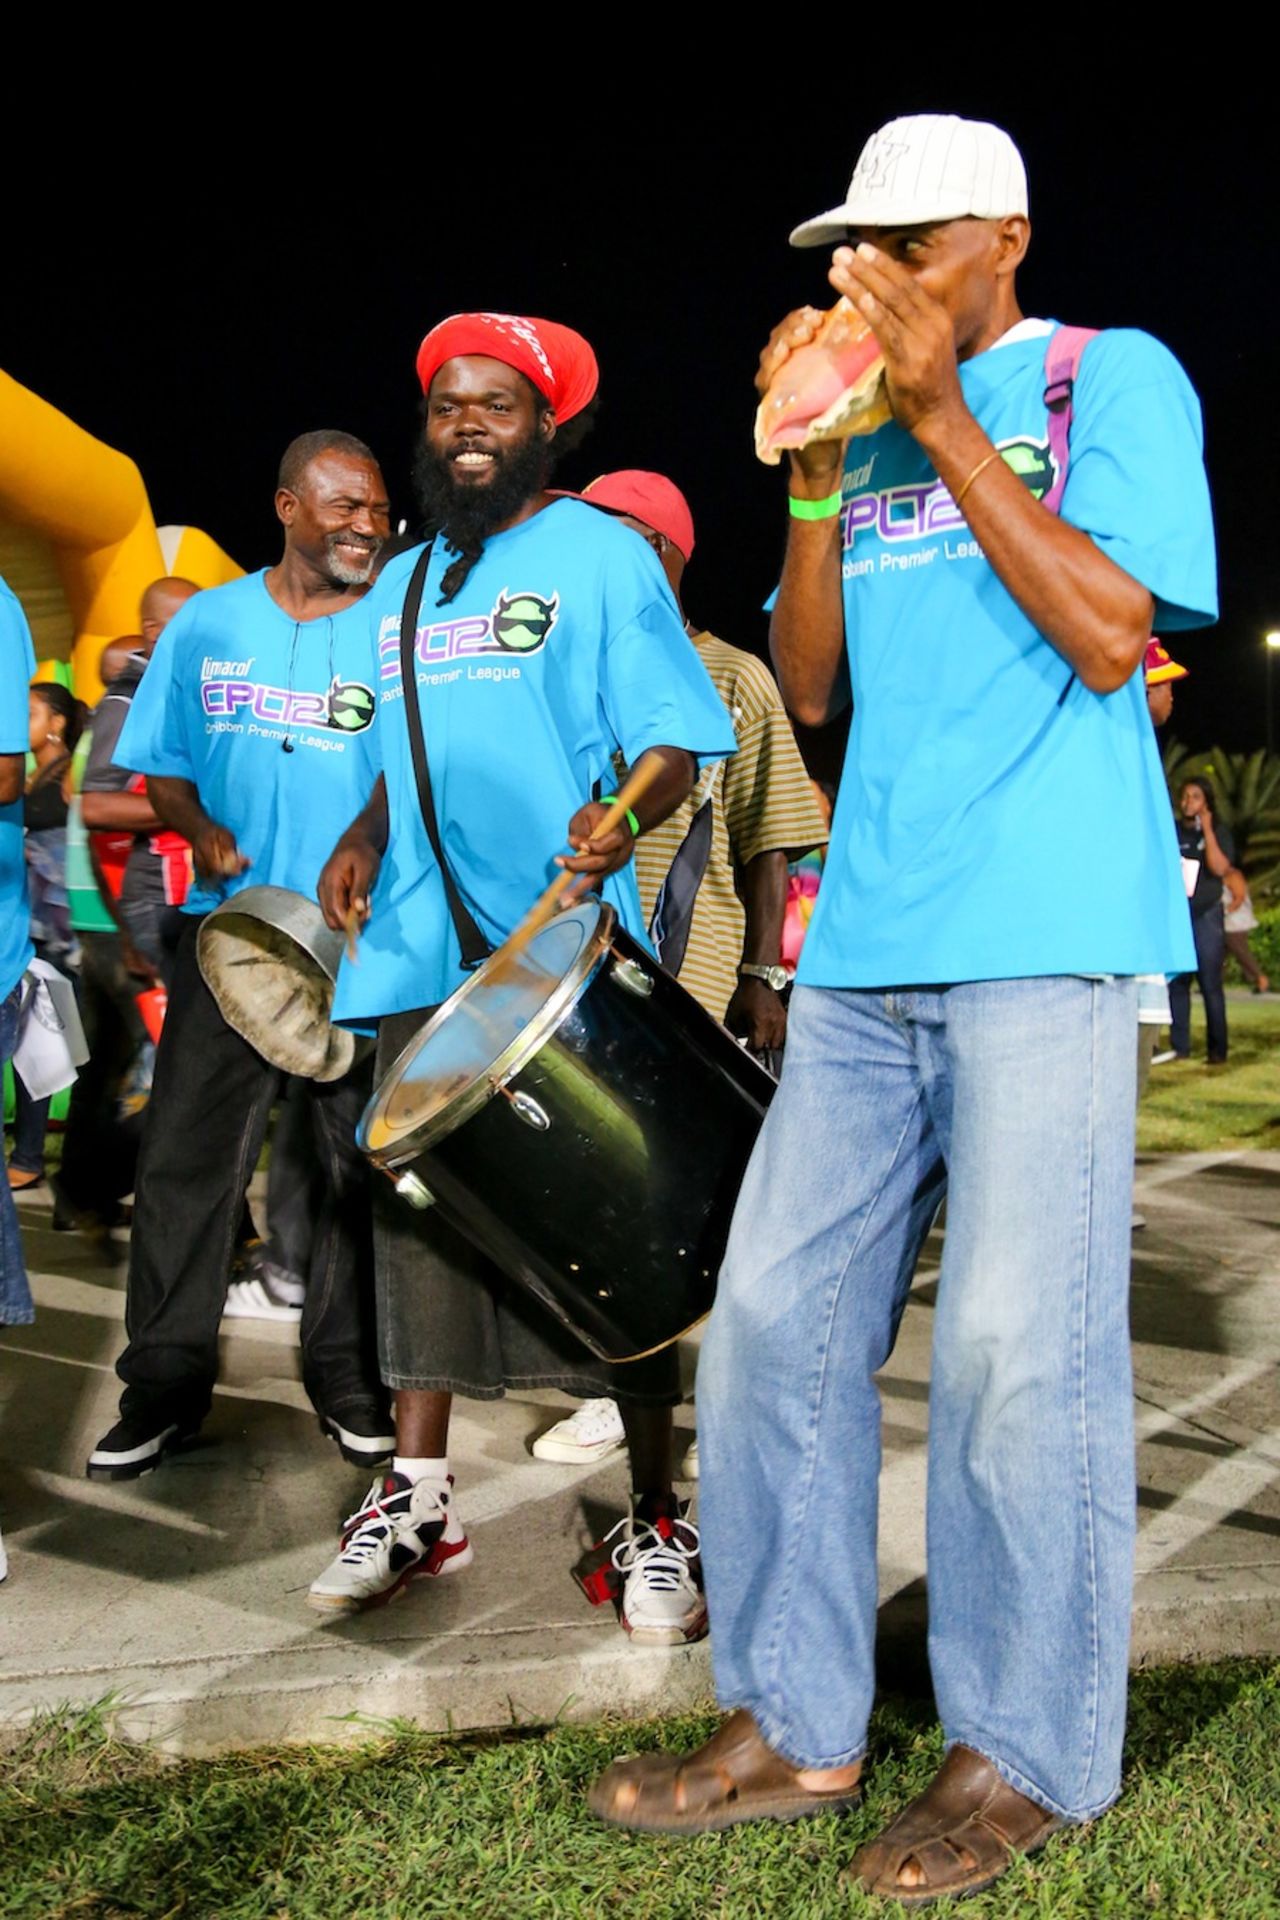 Music and cricket go hand-in-hand in West Indies, Antigua Hawksbills v Barbados Tridents, Antigua, Aug 13, 2013